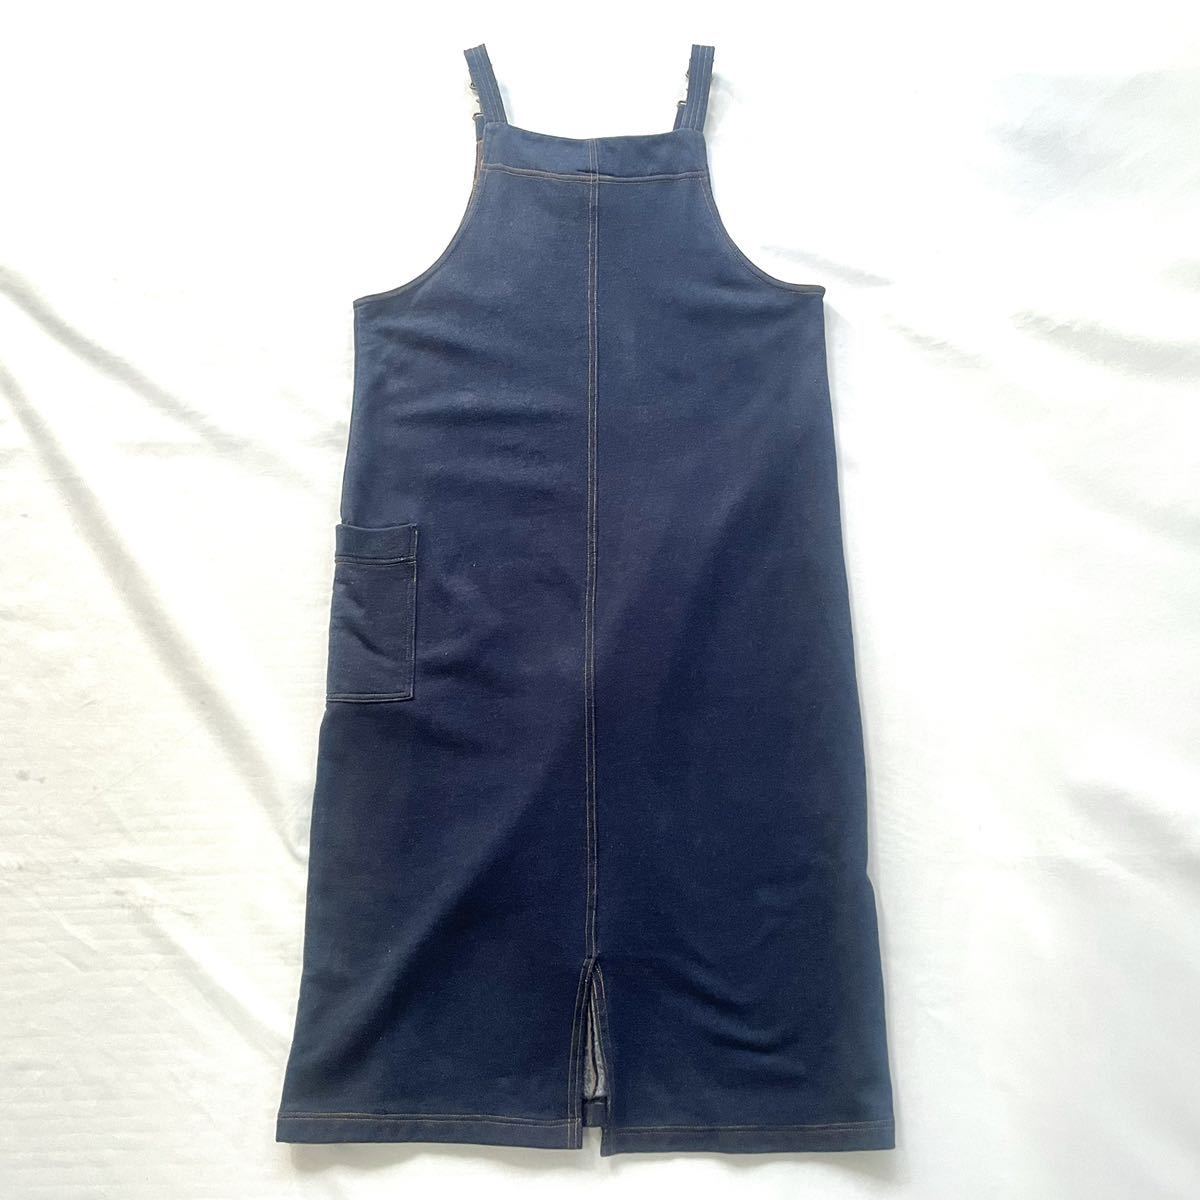 Made in USA America made Denim manner sweat overall One-piece vintage